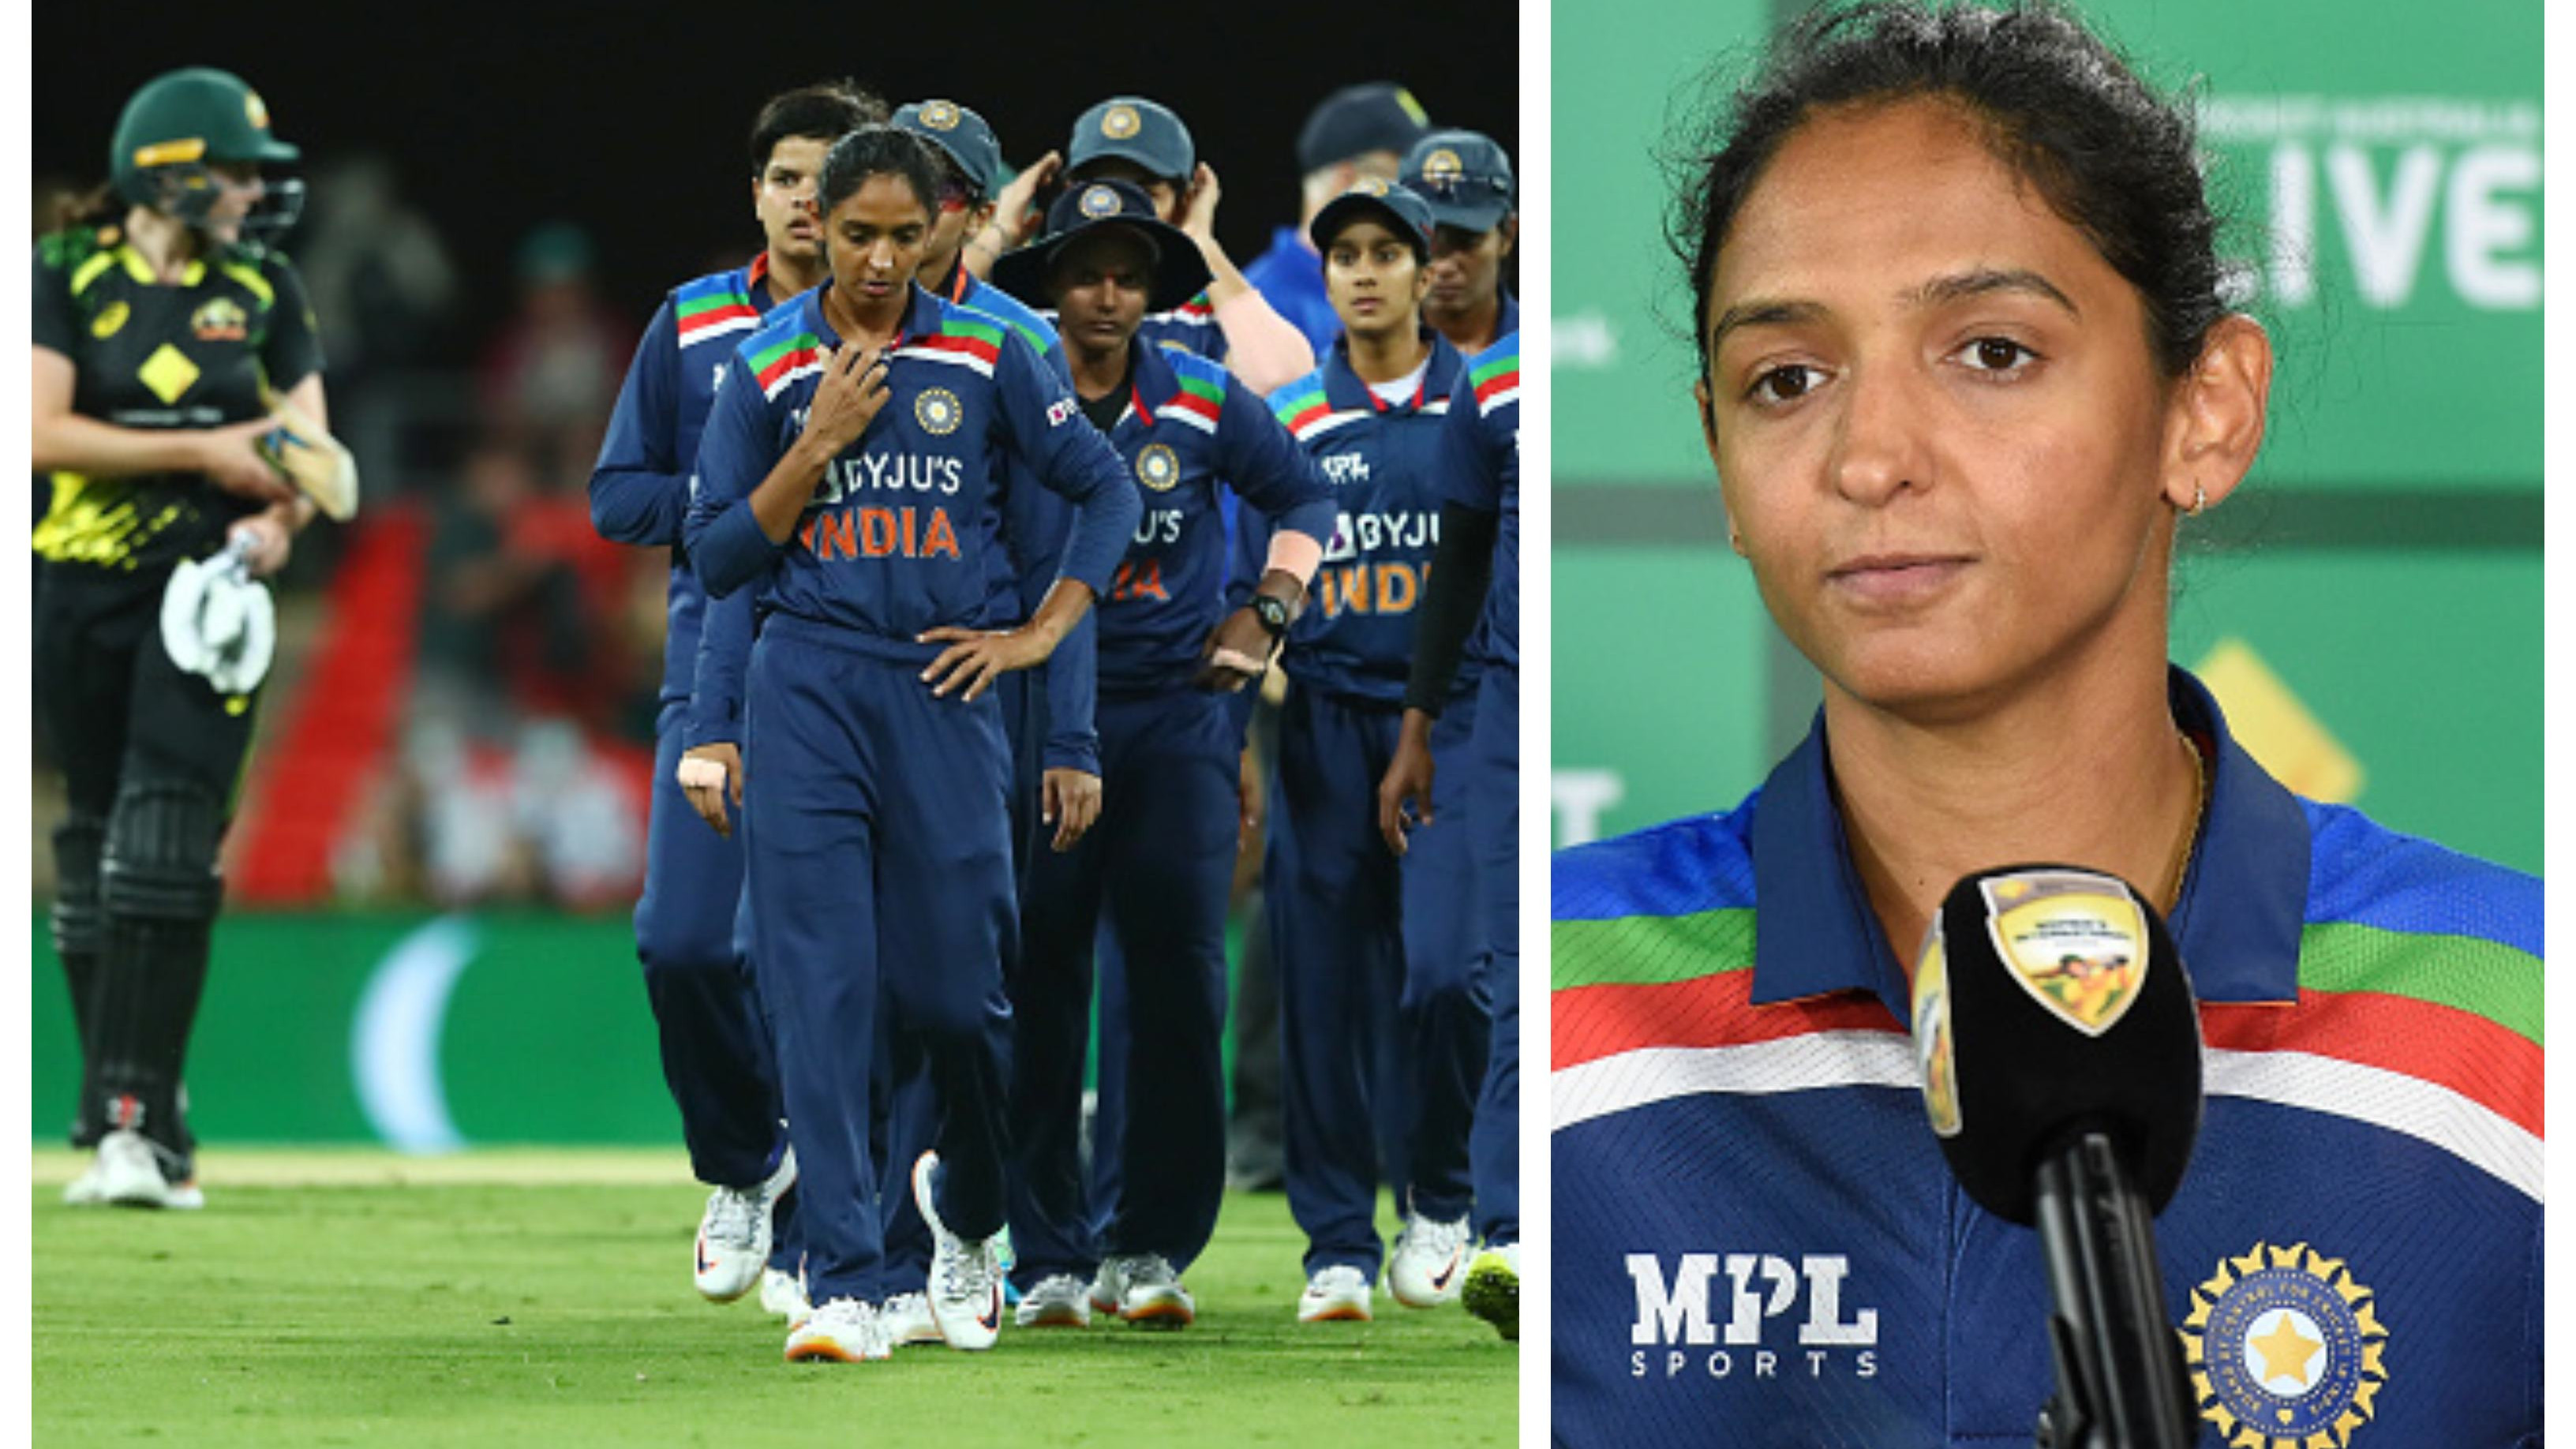 AUSW v INDW 2021: Harmanpreet Kaur highlights the need for women's IPL after close defeat in 2nd T20I